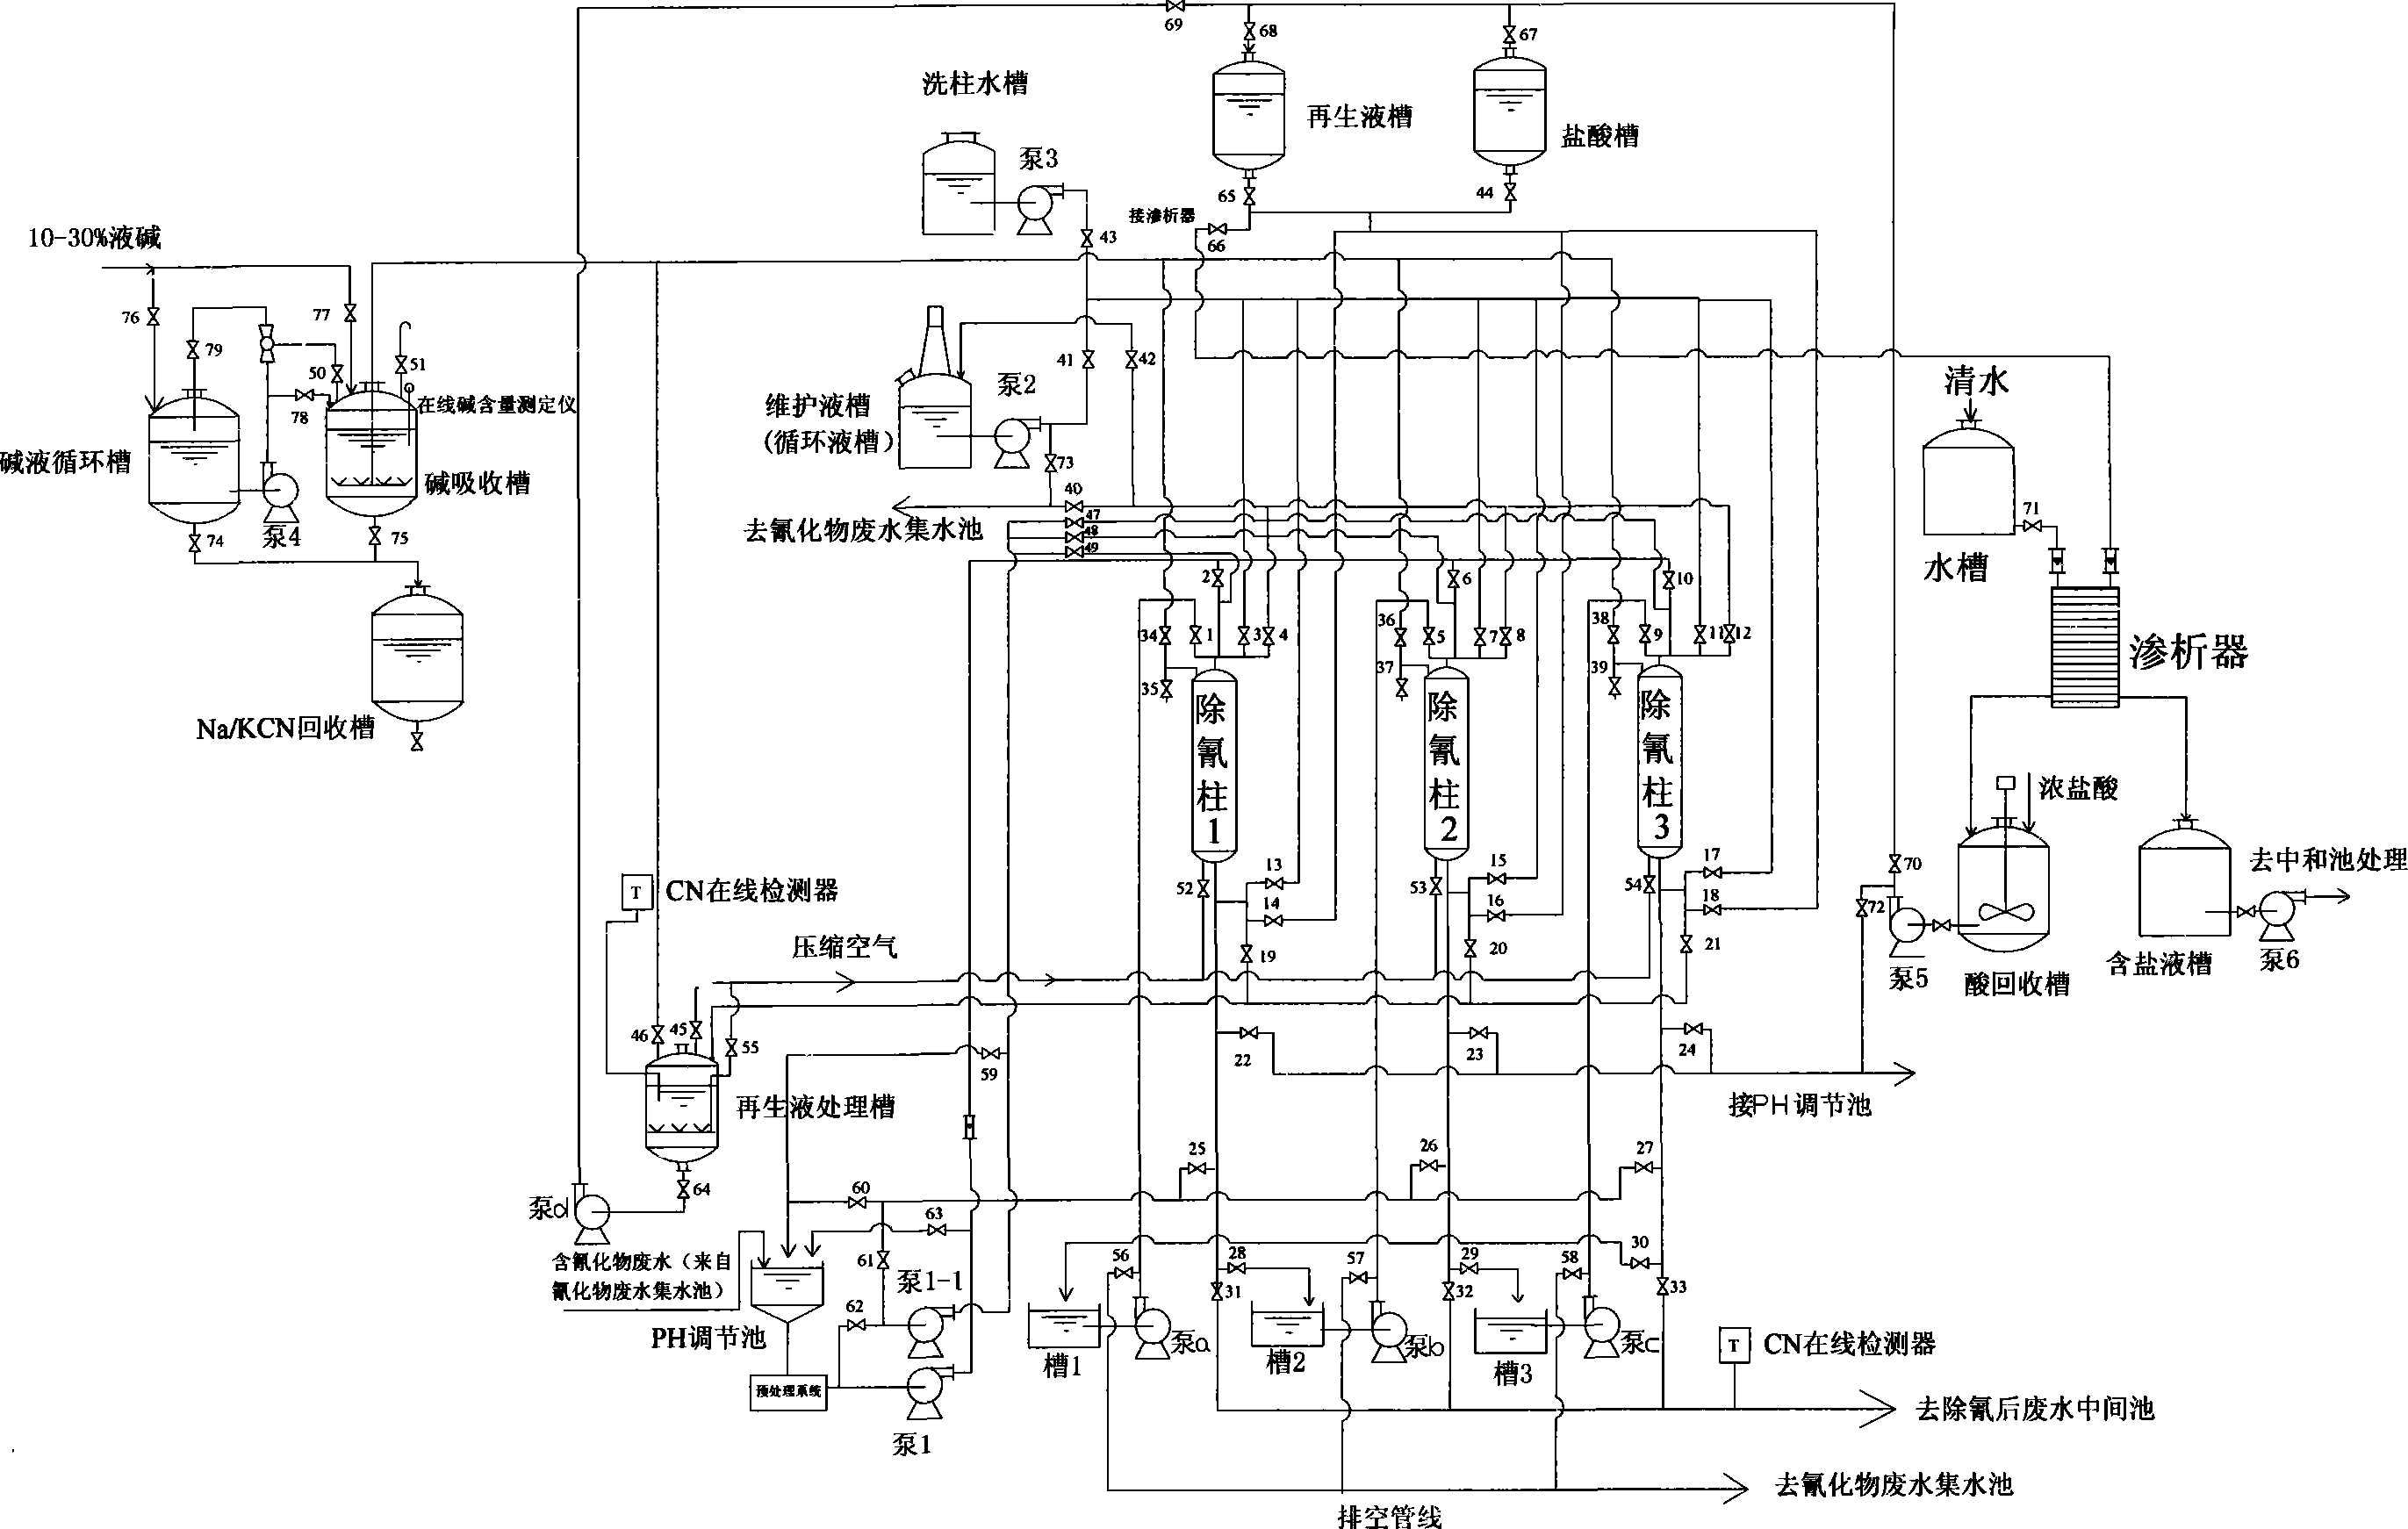 Ion exchange treatment process for cyanide containing wastewater